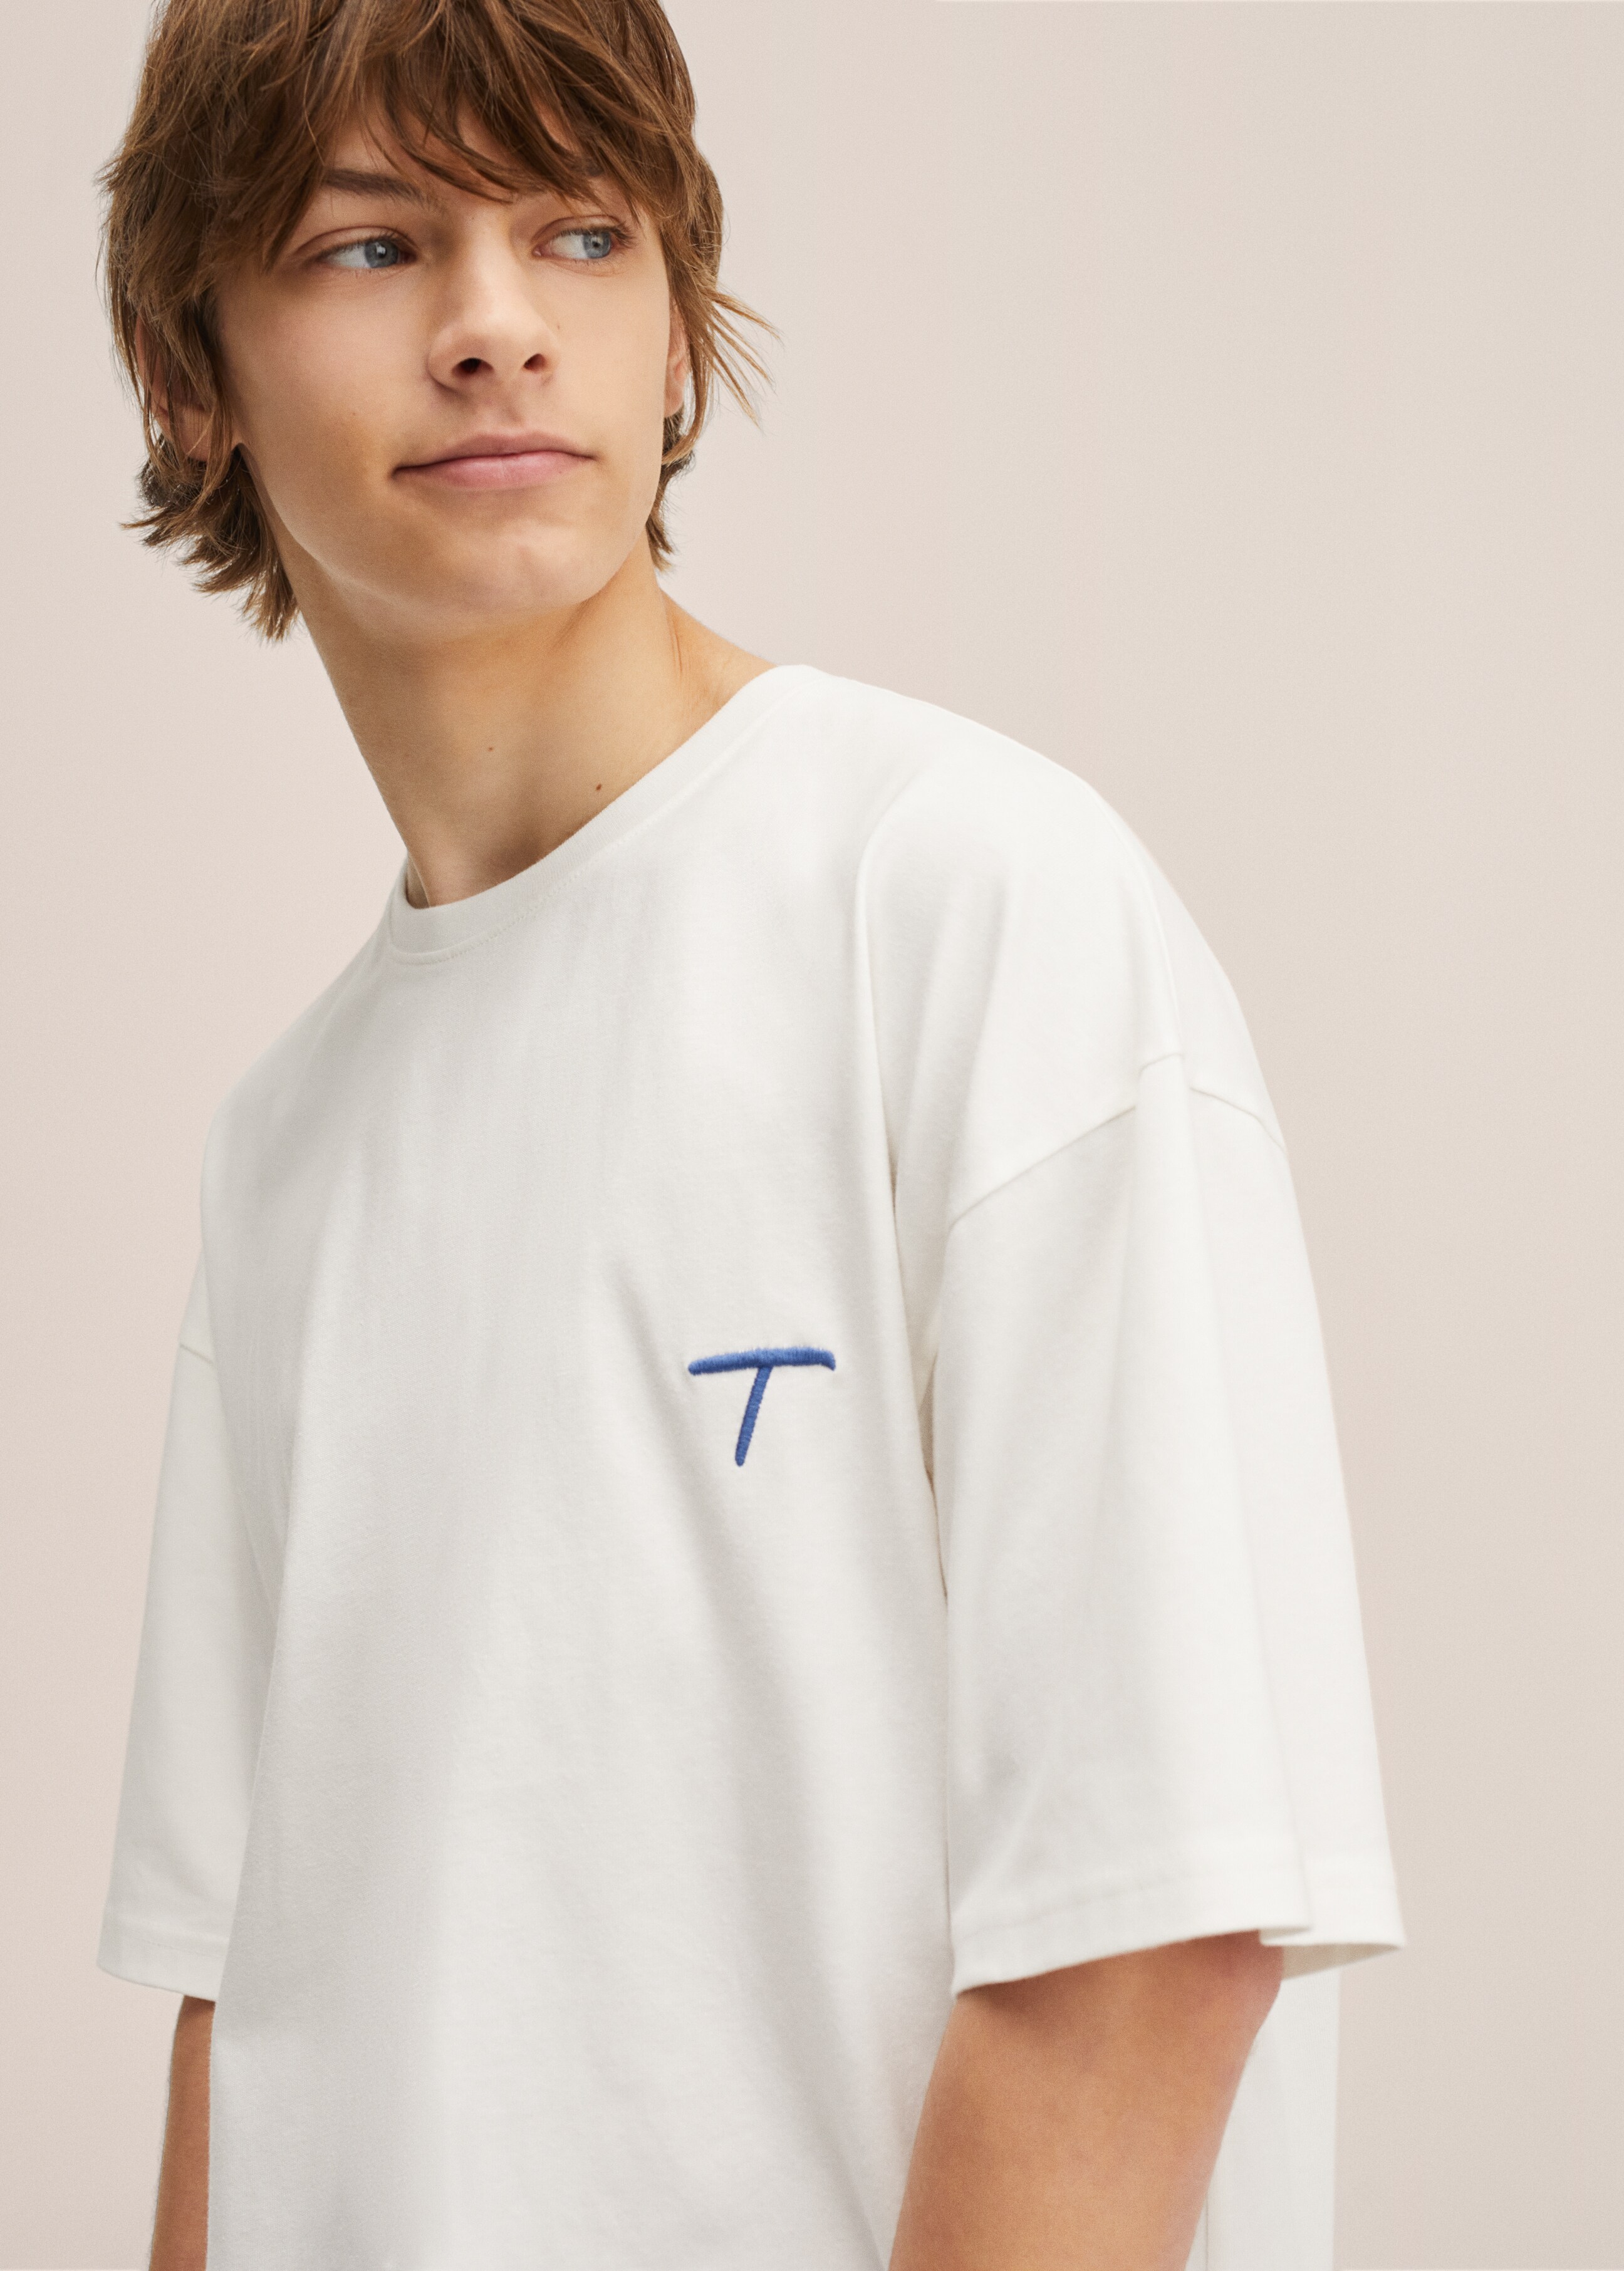 T Collection t-shirt - Details of the article 1